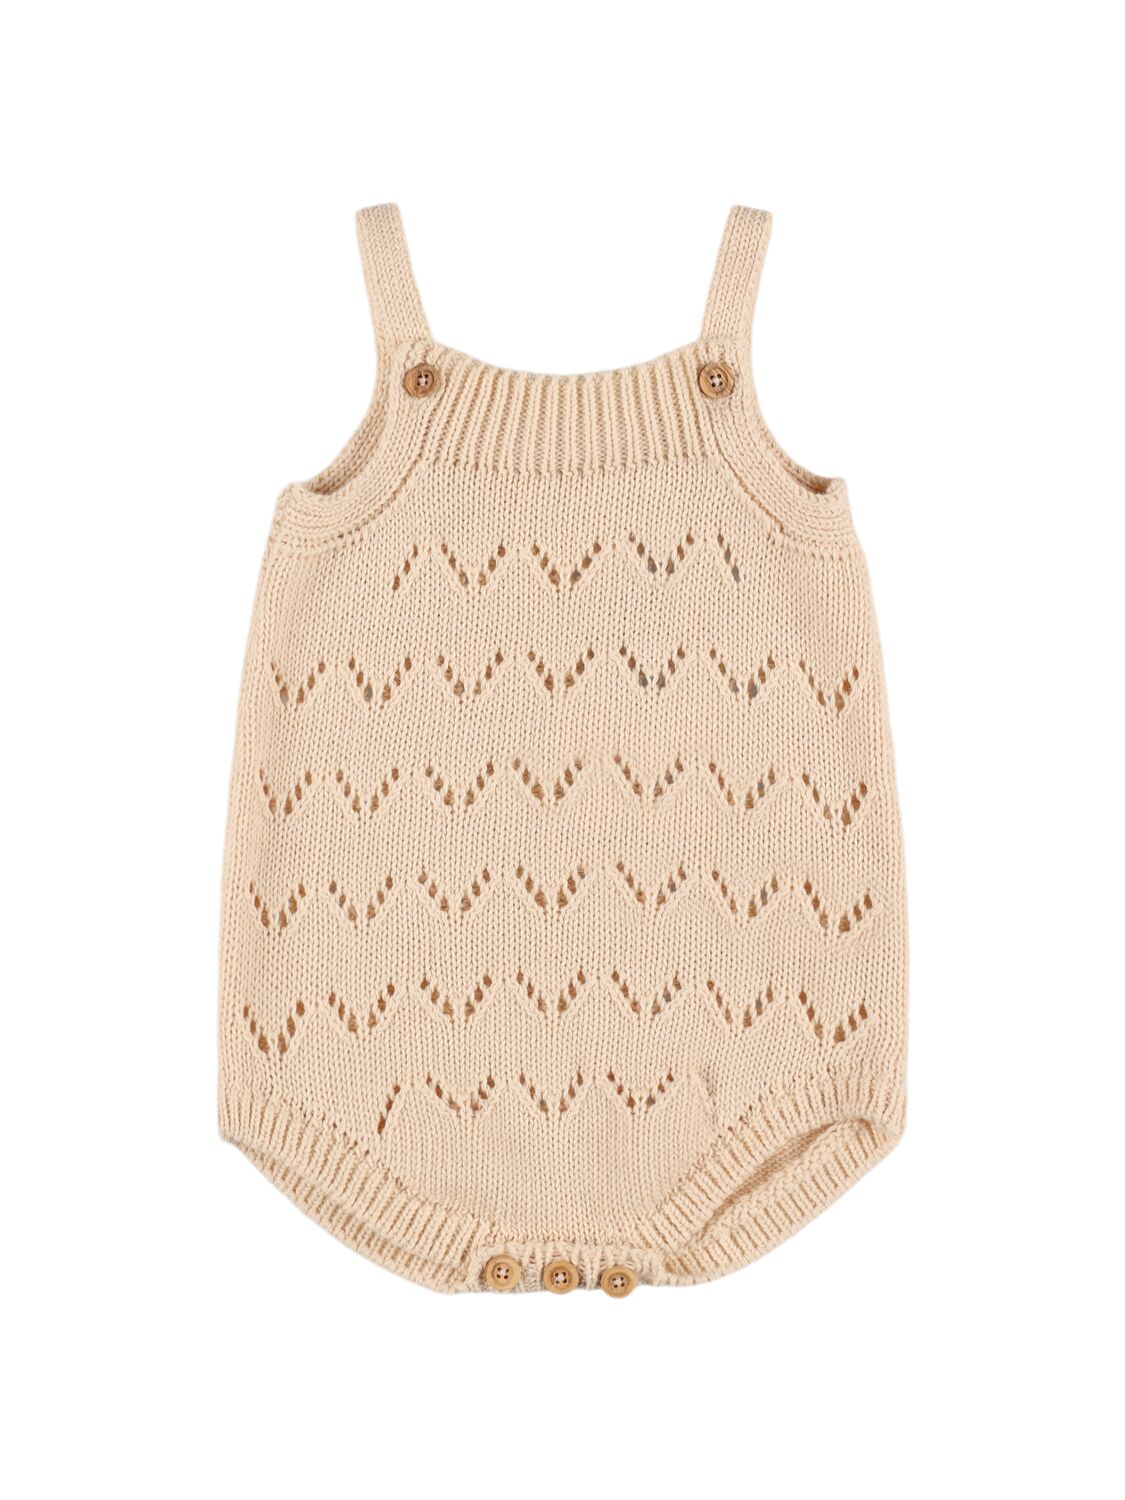 The New Society Babies' Organic Cotton Knit Bodysuit In Beige